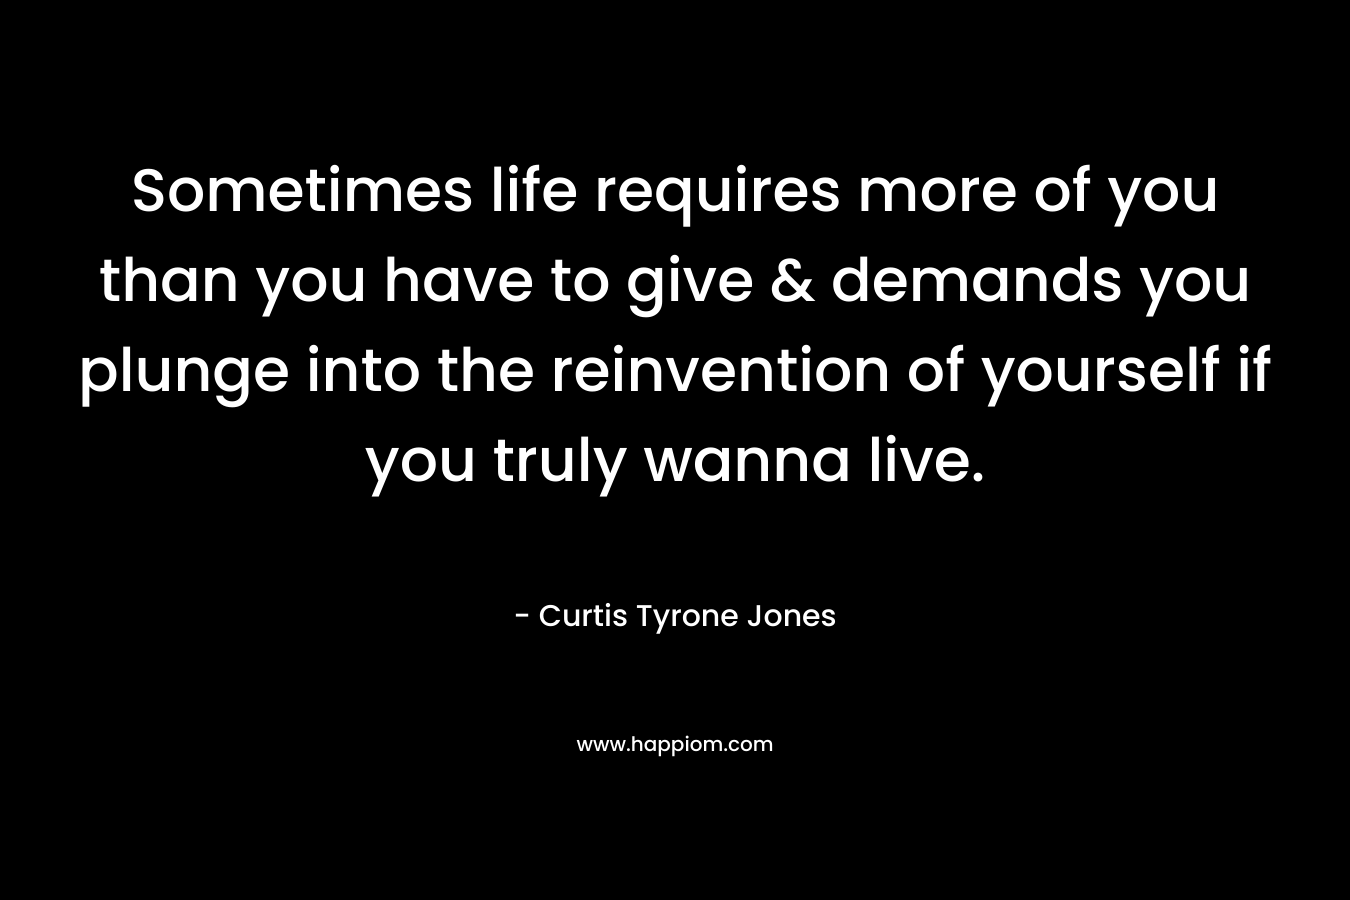 Sometimes life requires more of you than you have to give & demands you plunge into the reinvention of yourself if you truly wanna live.